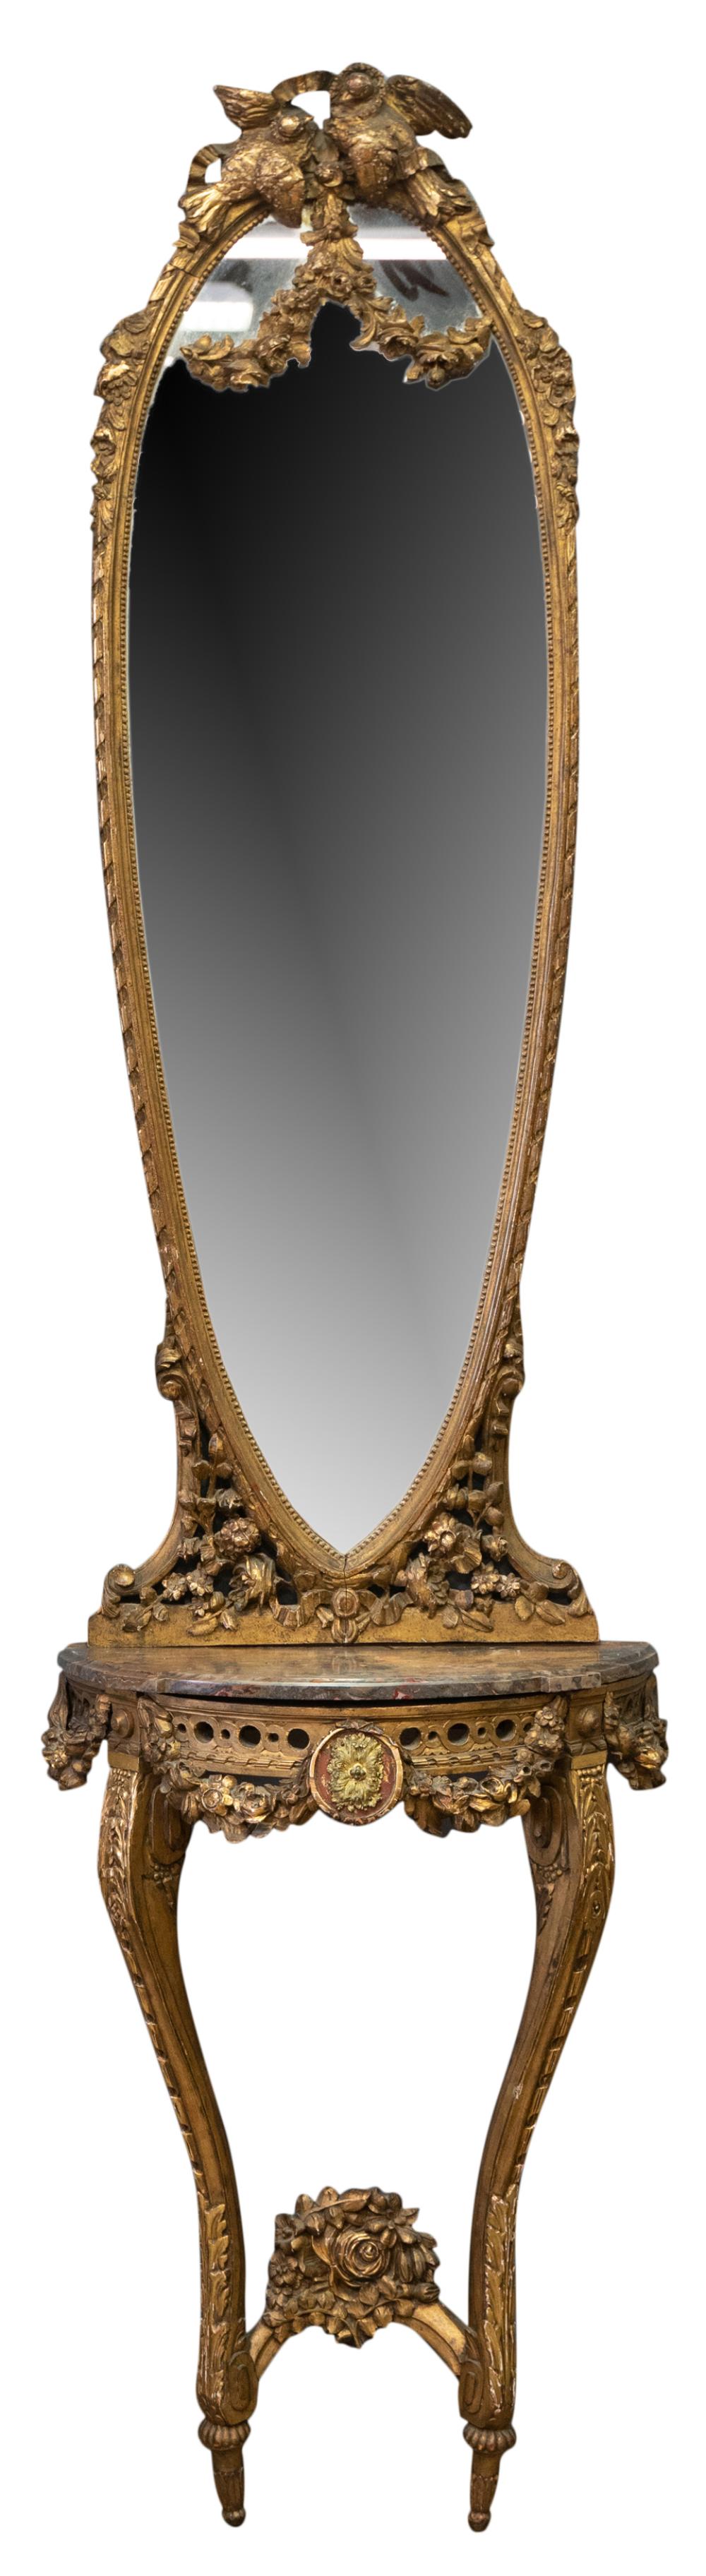 CONTINENTAL CARVED GILTWOOD MIRROR